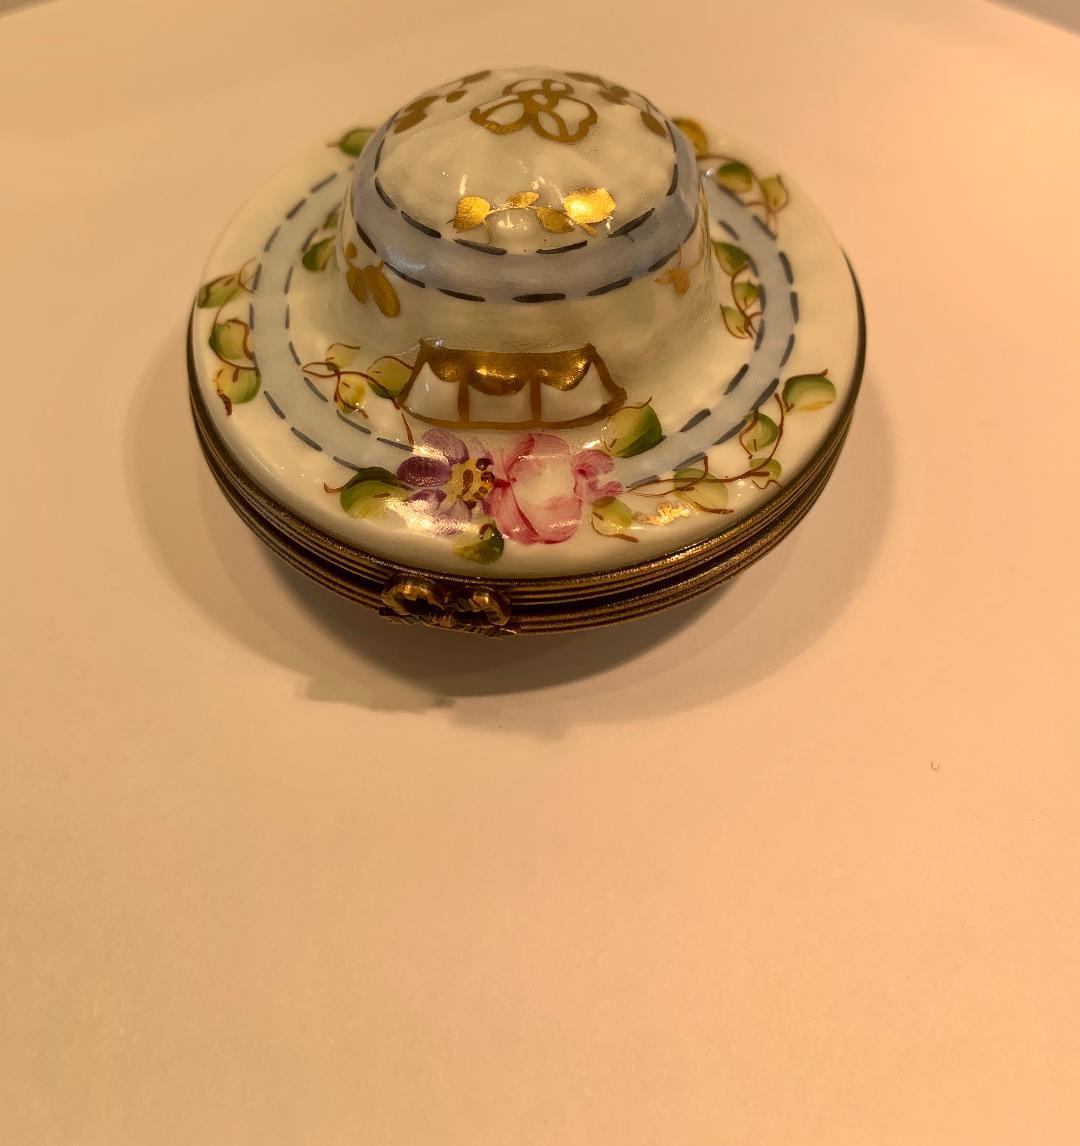 Very pretty, Limoges porcelain miniature hat shaped trinket box is handmade and hand painted in France and features vining floral motif with rich 24-karat gold accents. Box features antiqued gold gilt metal fittings and trim with a sweet 